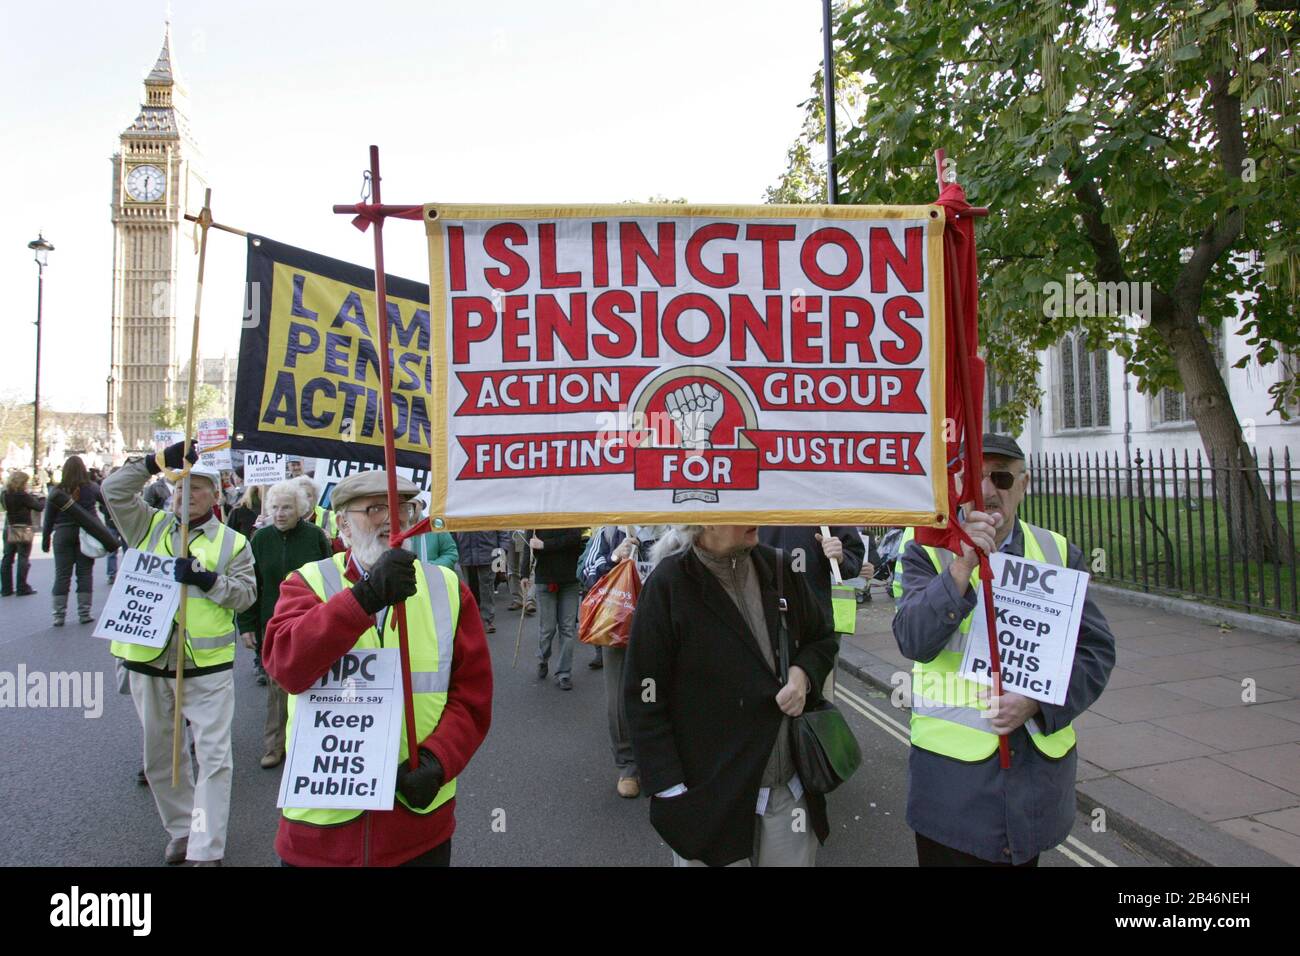 Lambeth & Islington Pensioners Action Groups on Save the NHS demo; Westminster; London 1 Nov 2006 UK Stock Photo